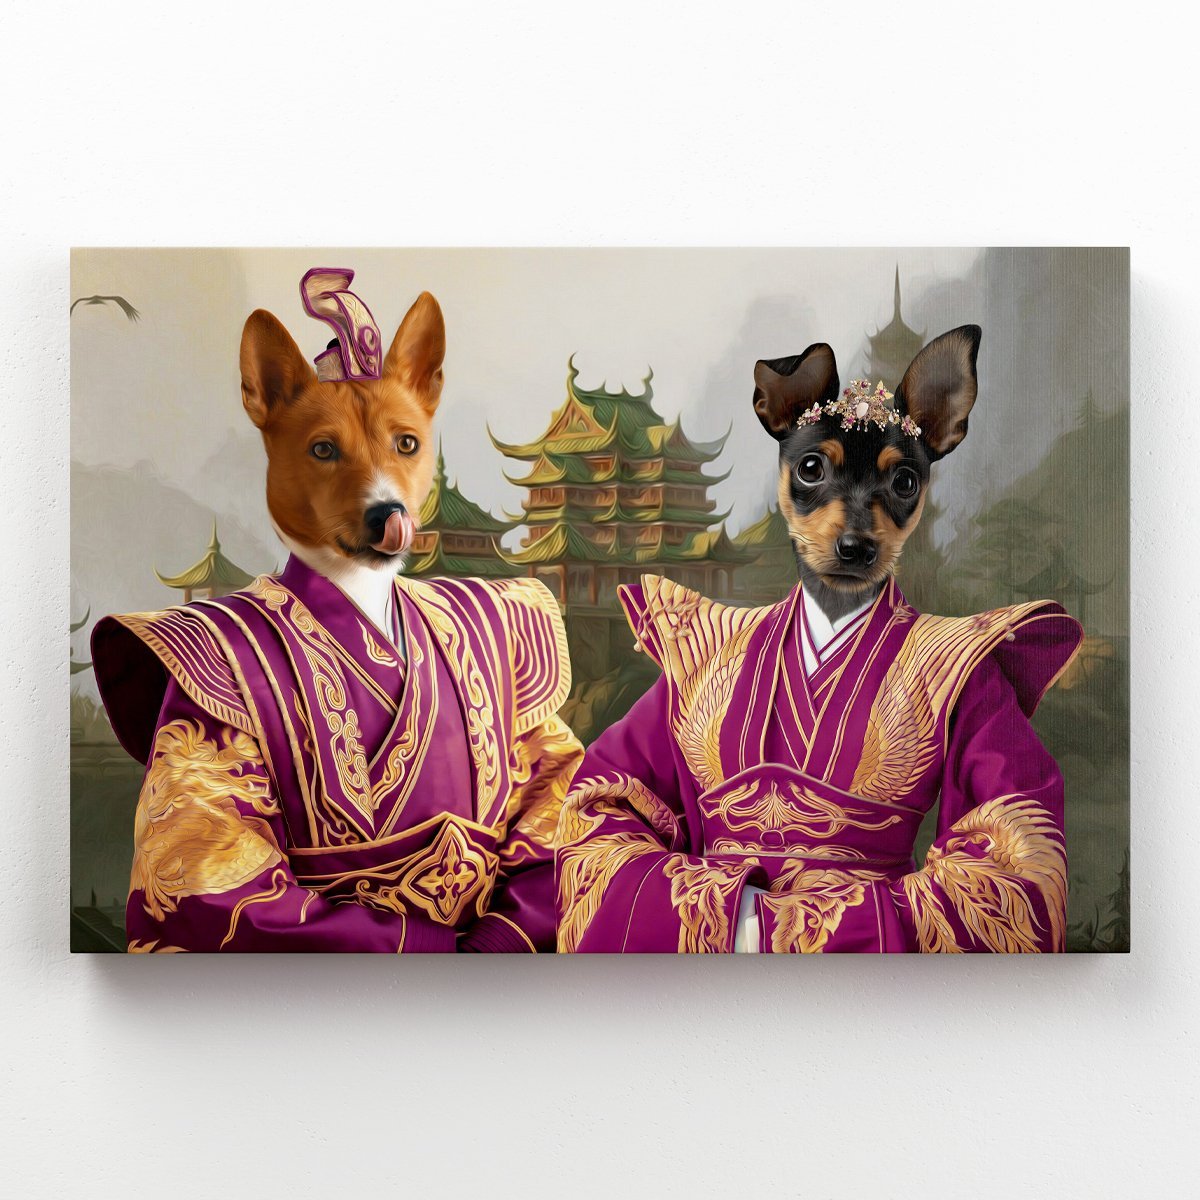 The Chinese Rulers: Custom Pet Canvas - Paw & Glory - #pet portraits# - #dog portraits# - #pet portraits uk#paw & glory, pet portraits canvas,custom dog canvas art, pet art canvas, pets painted on canvas, dog canvas wall art, personalised dog canvas